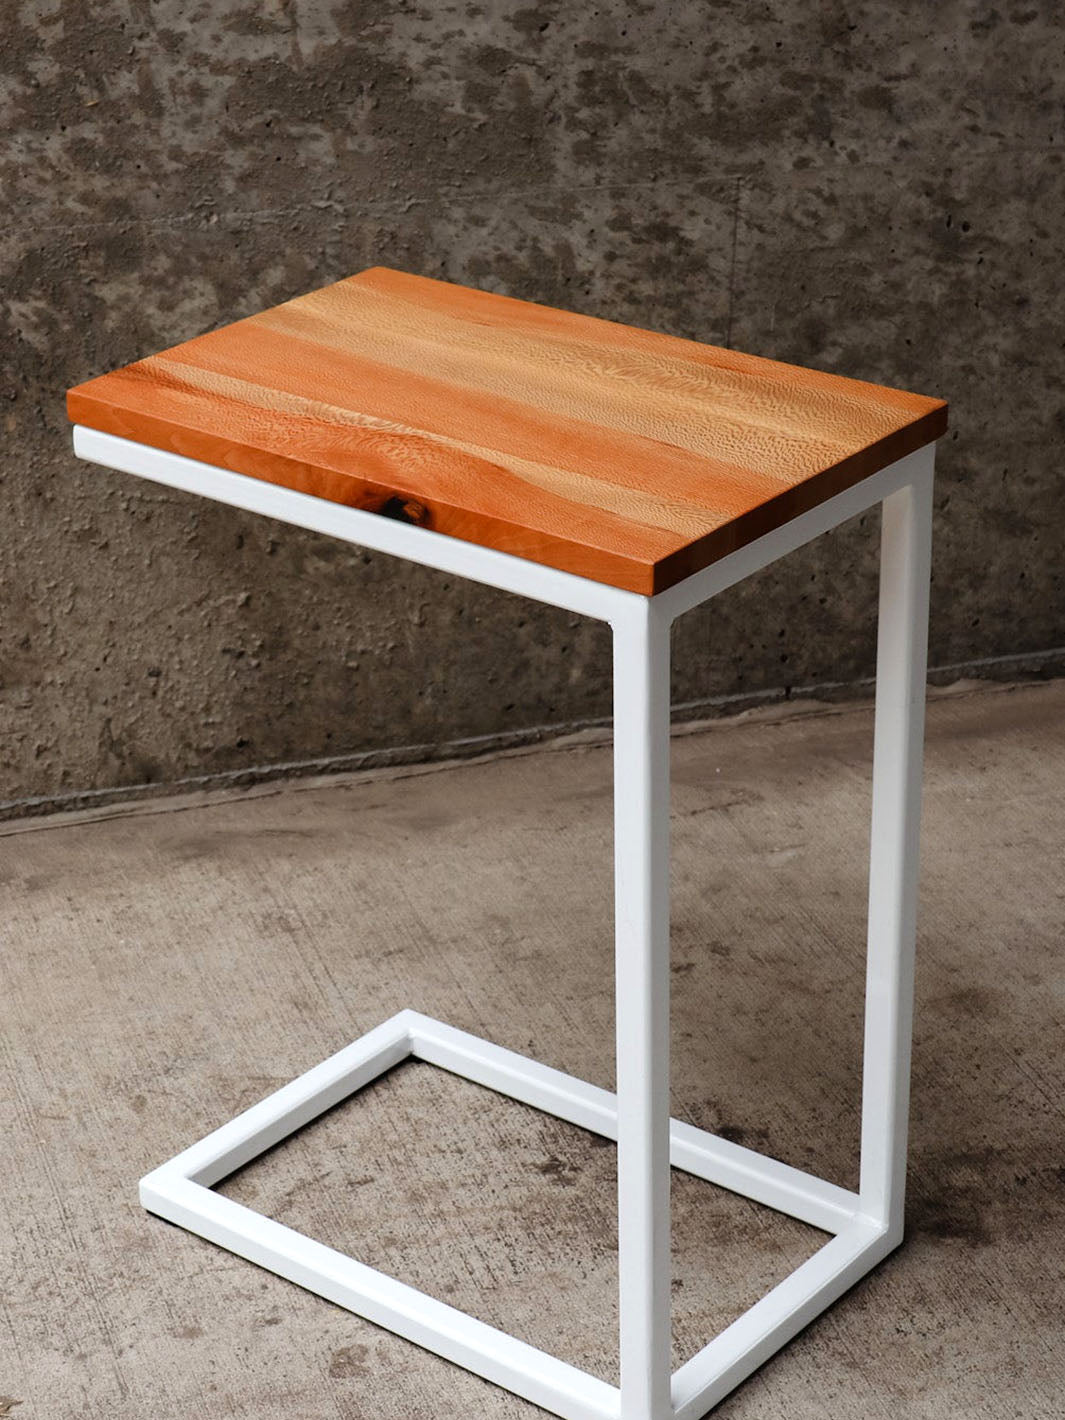 Quartersawn Sycamore Industrial Side C Table with White Base Earthly Comfort Side Tables 1114-11